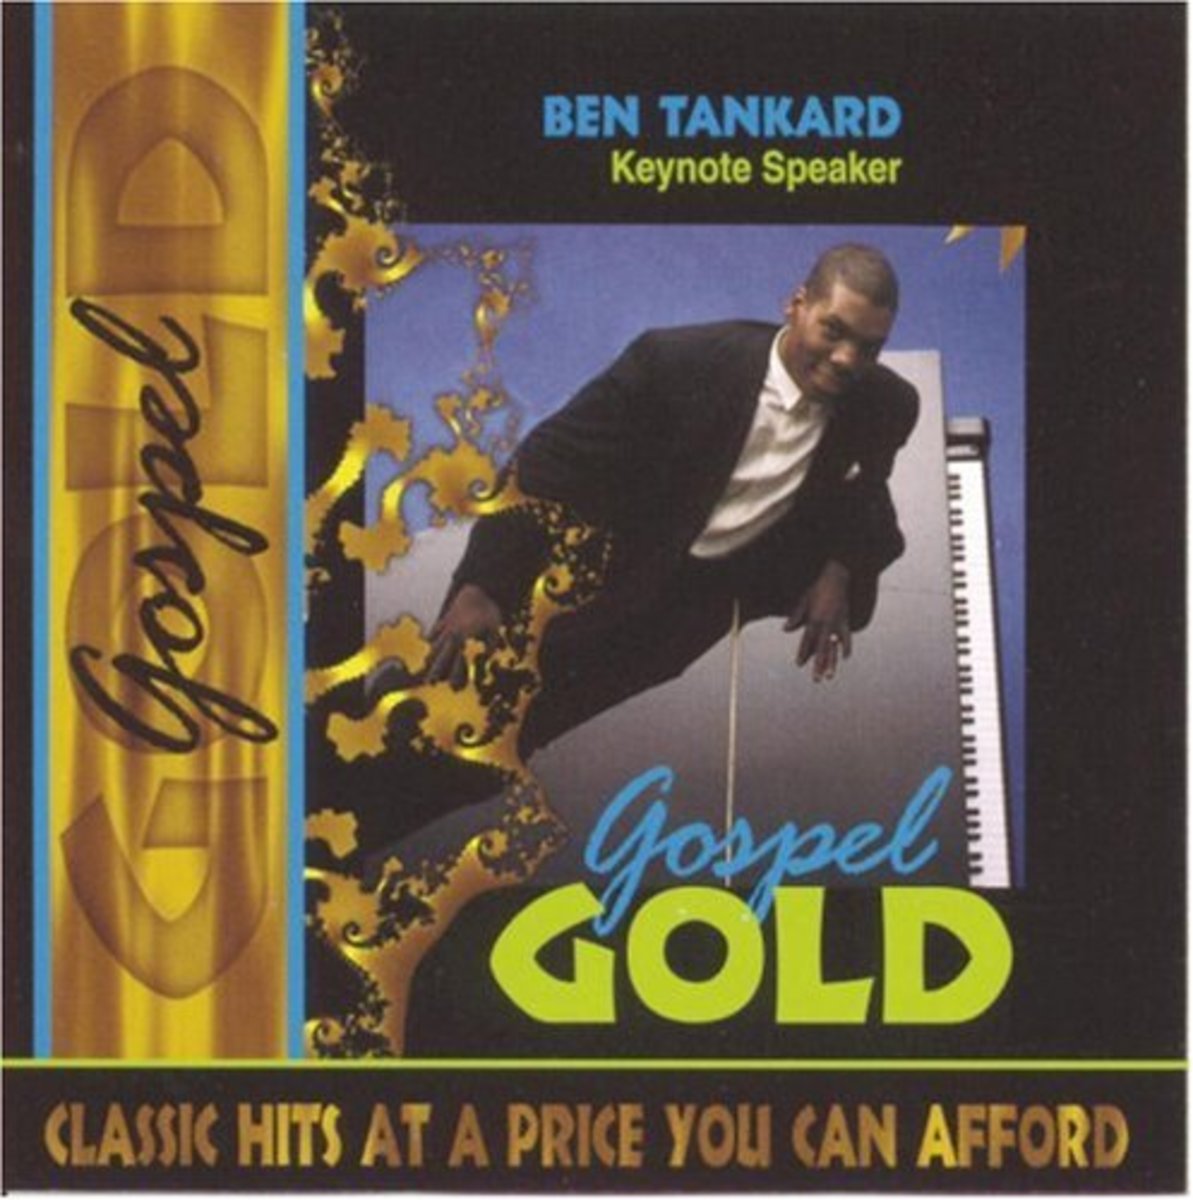 When this guy came on the scene with his anointed piano playing, it was such a breath of fresh air. Not that there hadn't been Gospel instrumentals before. But in this case, Ben Tankard brought that Smooth Jazz flavor along with the sacred